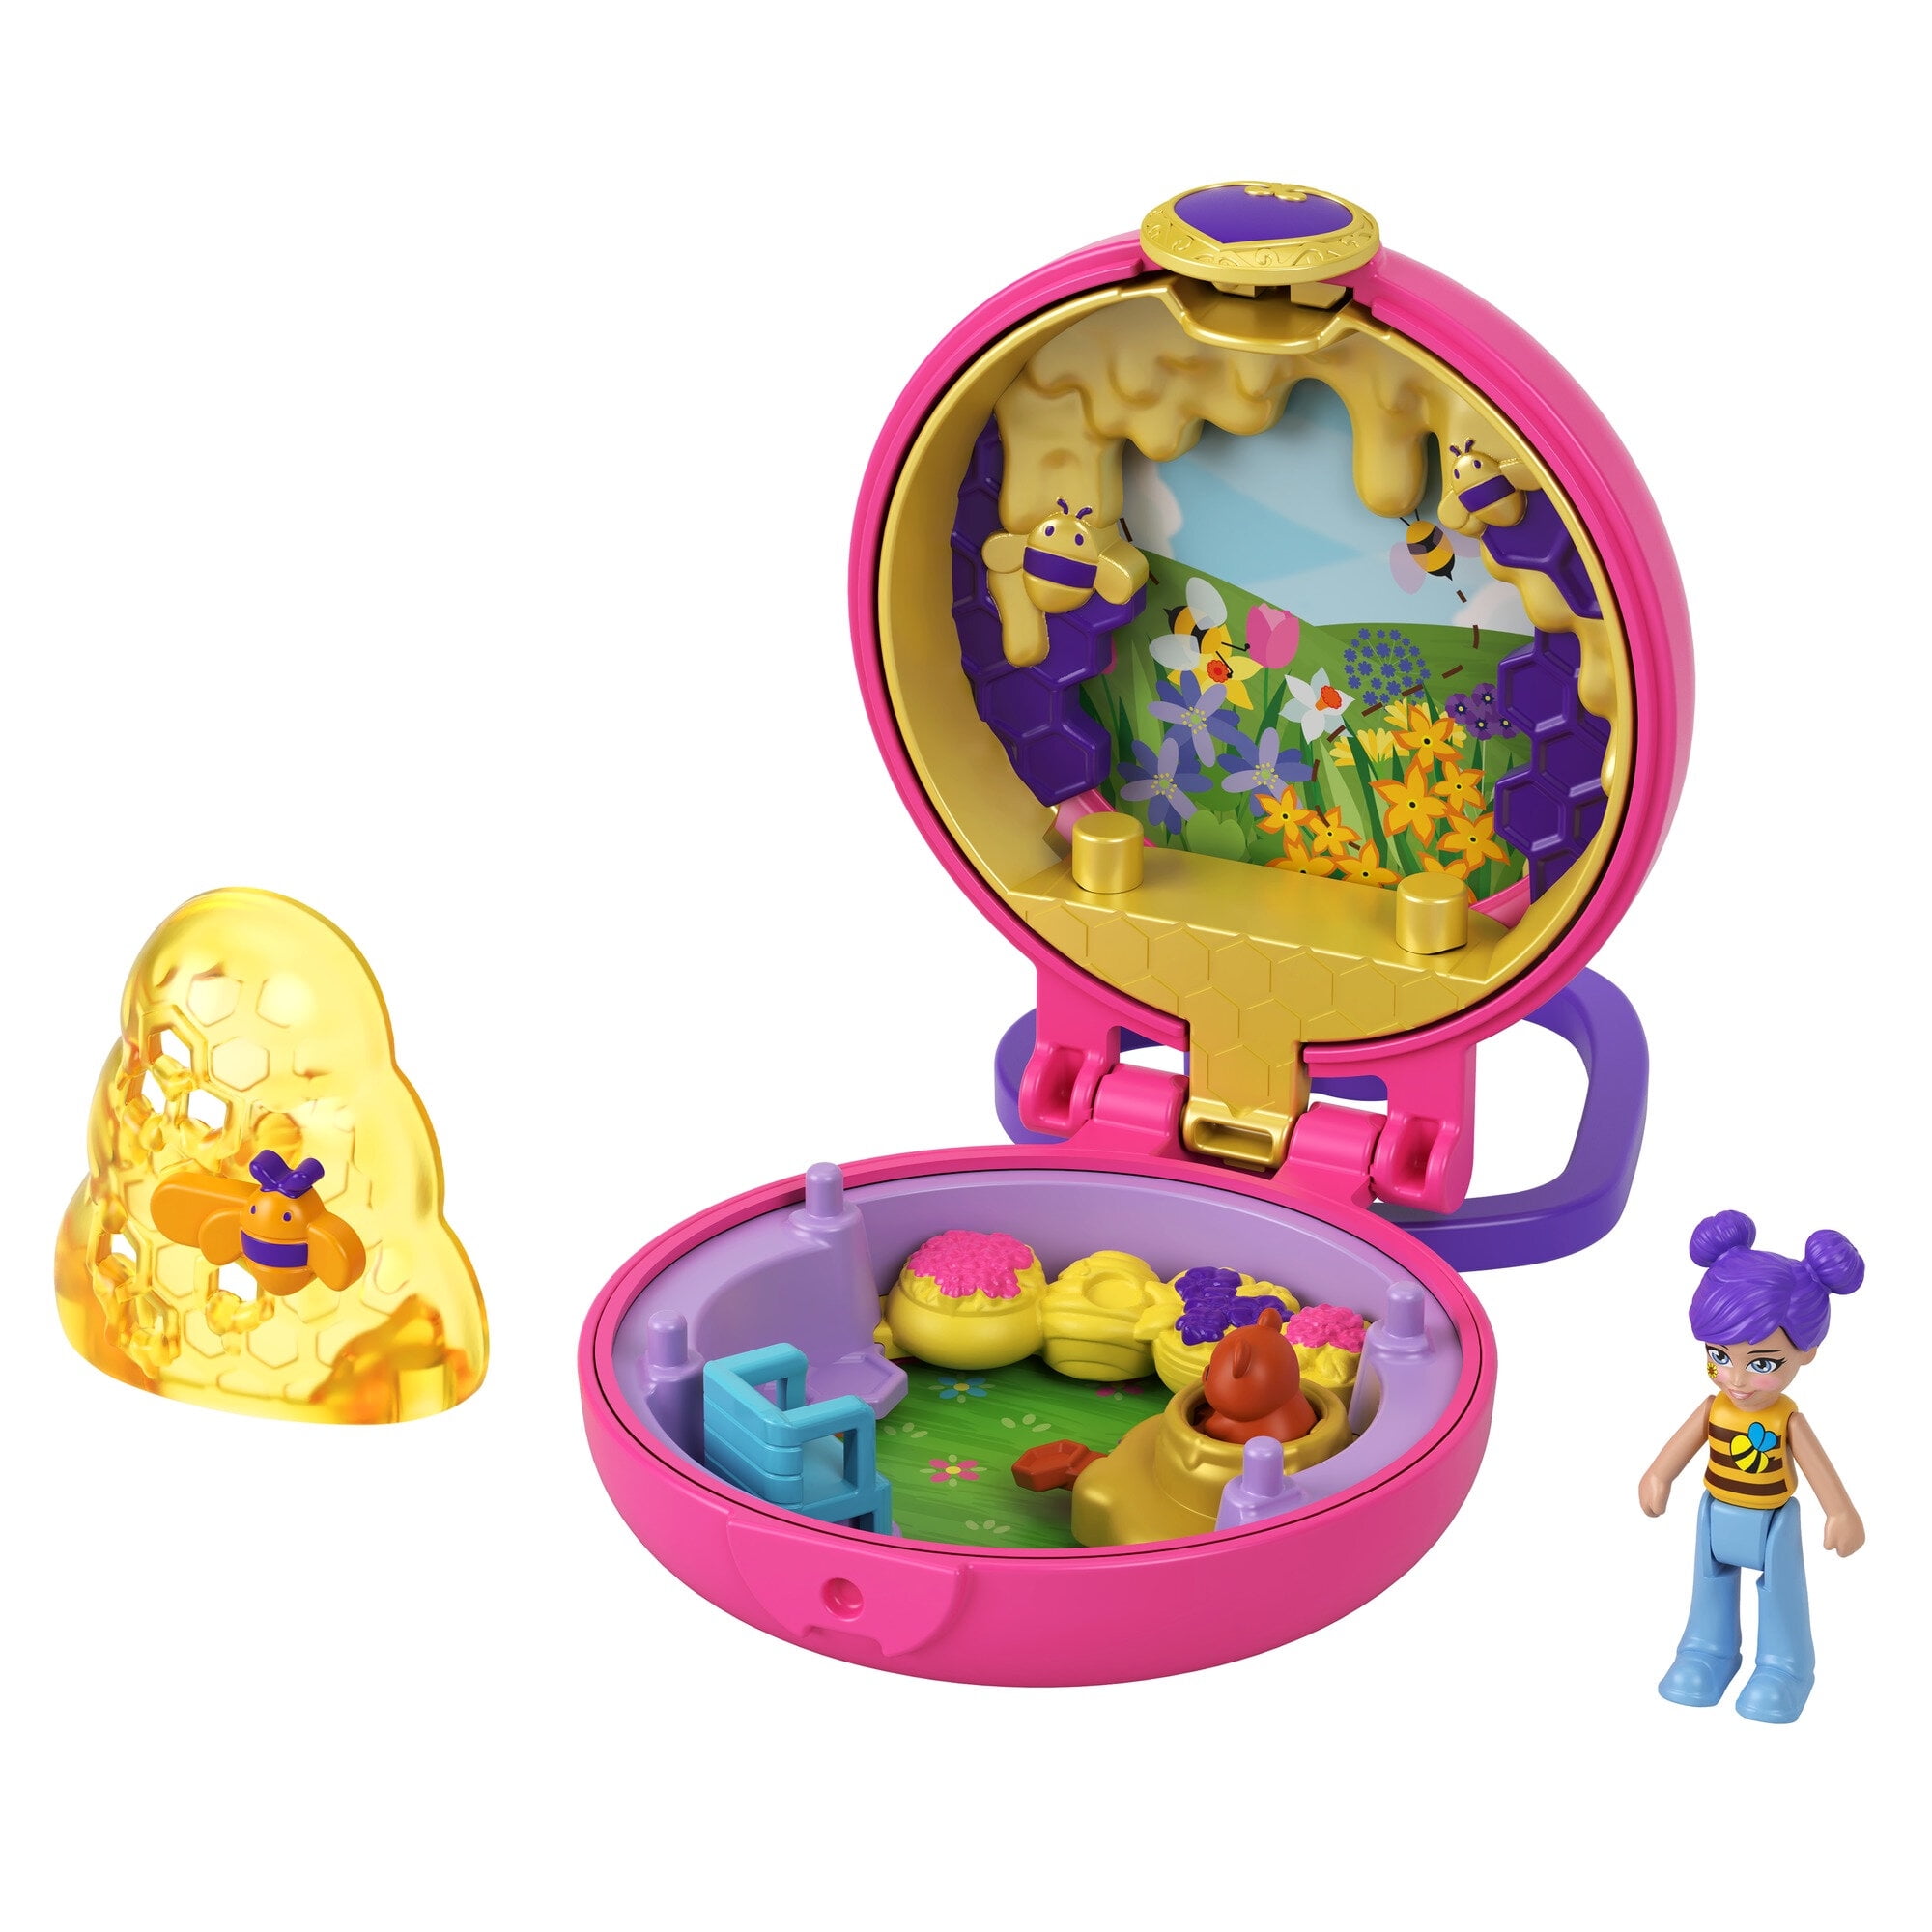 NEW Polly Pocket Tropical Pineapple boxed 